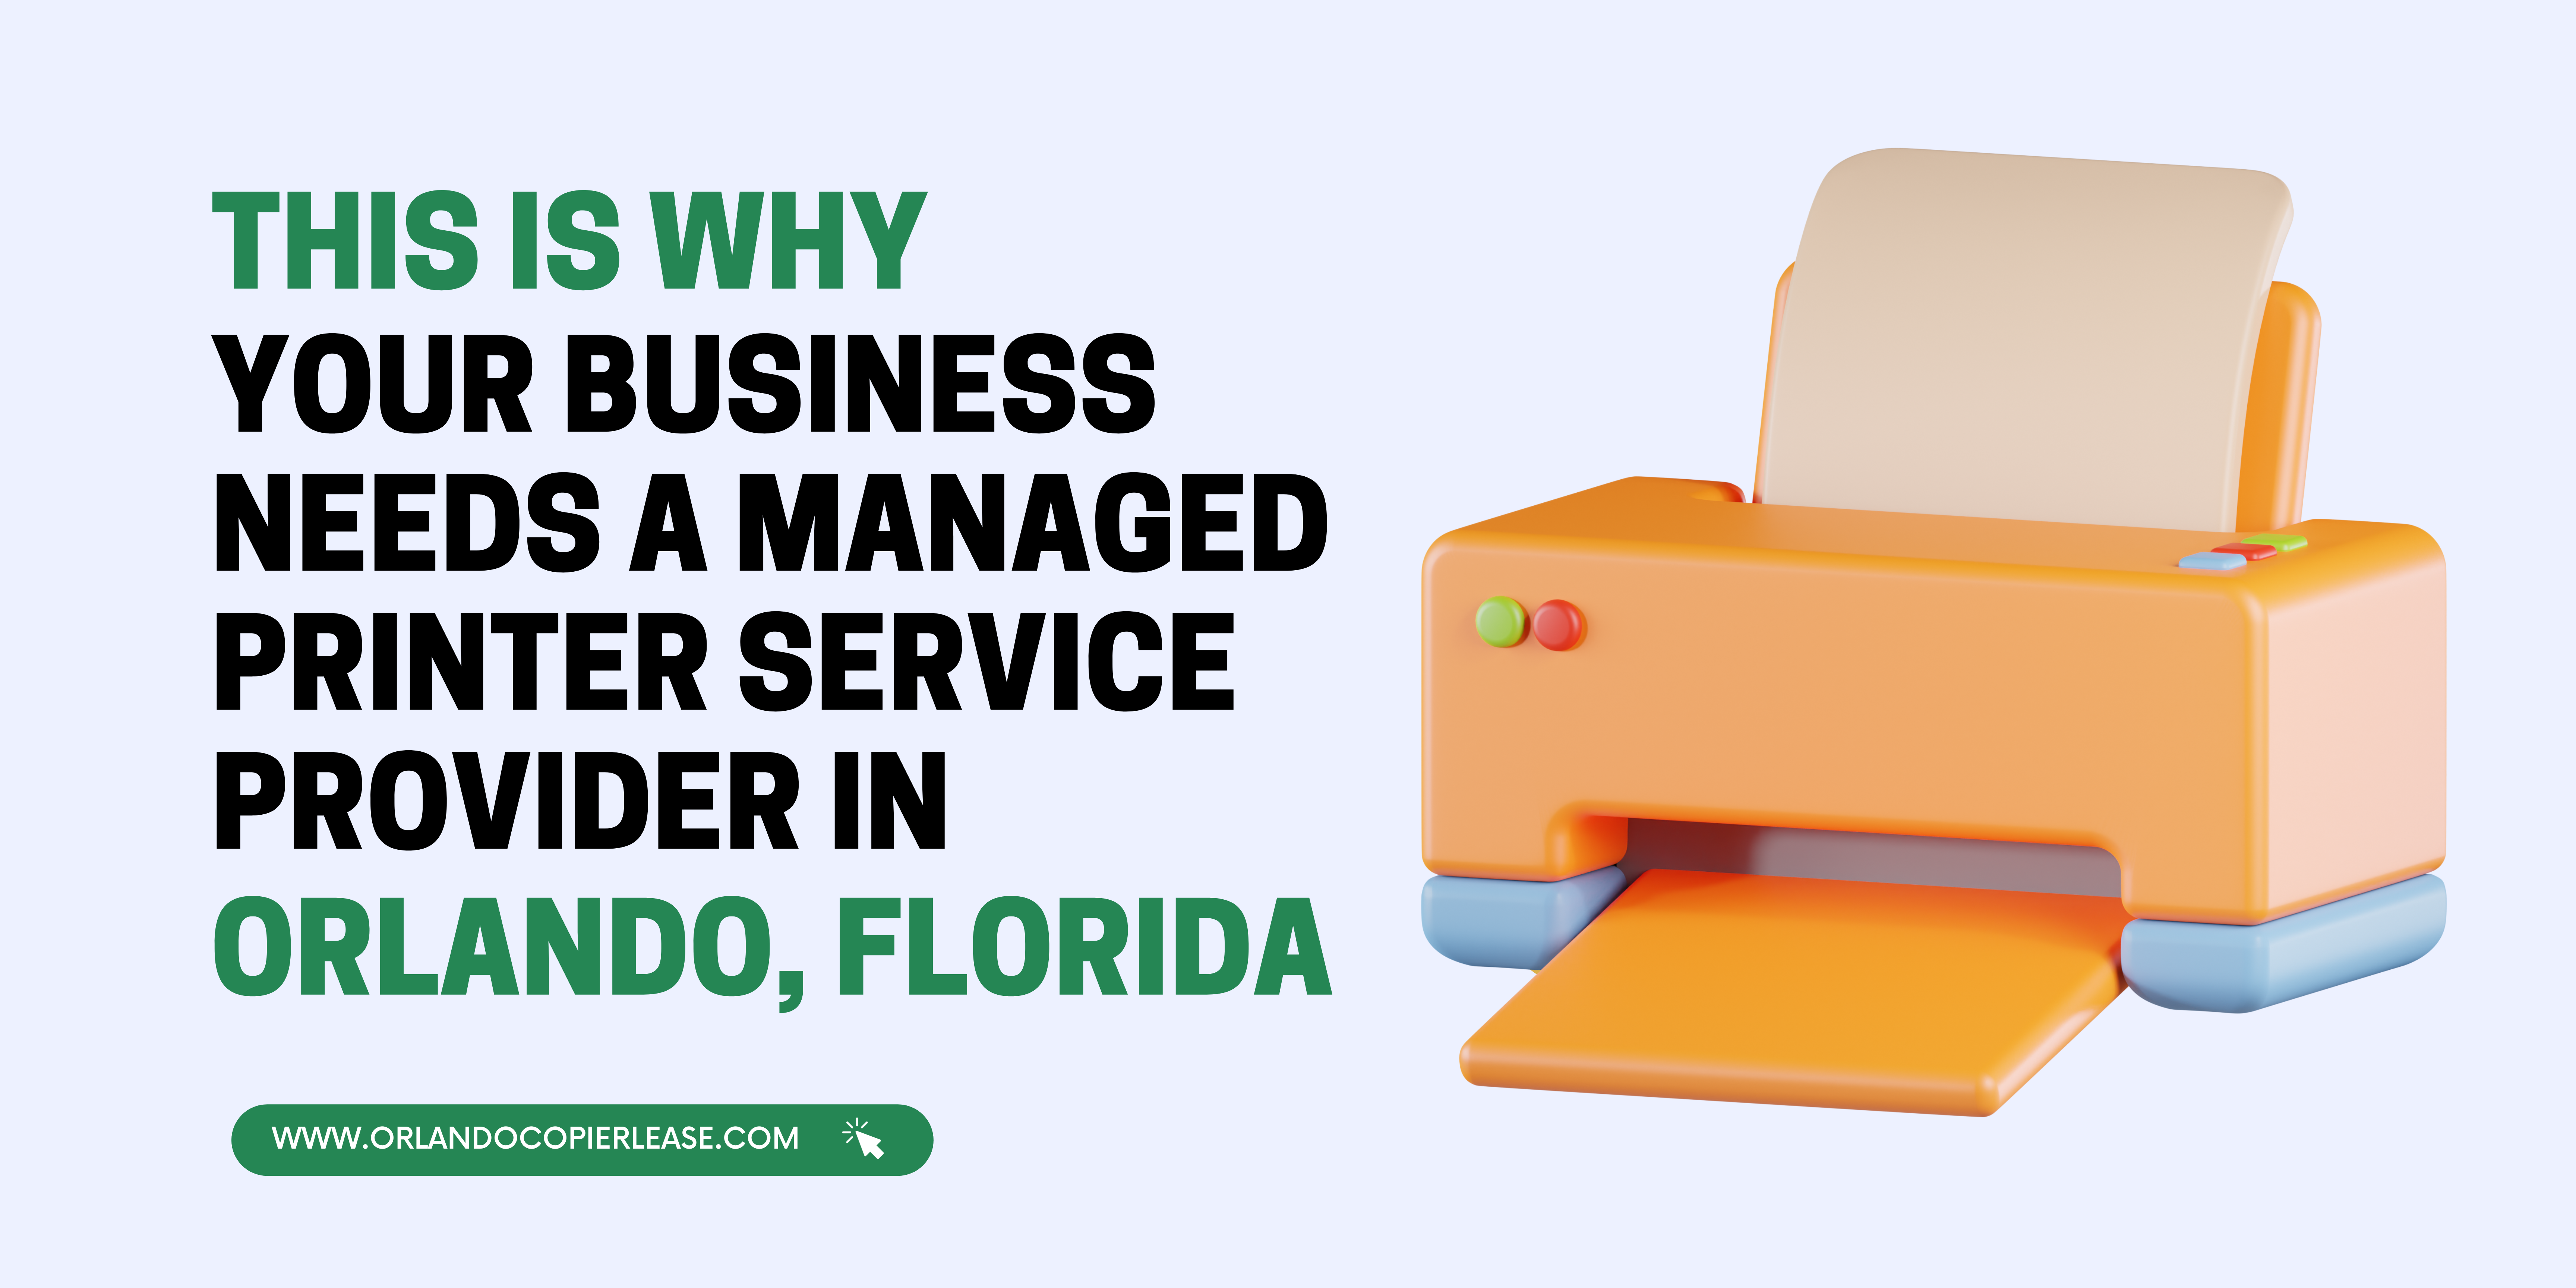 This is Why Your Business Needs a Managed Printer Service Provider in Orlando